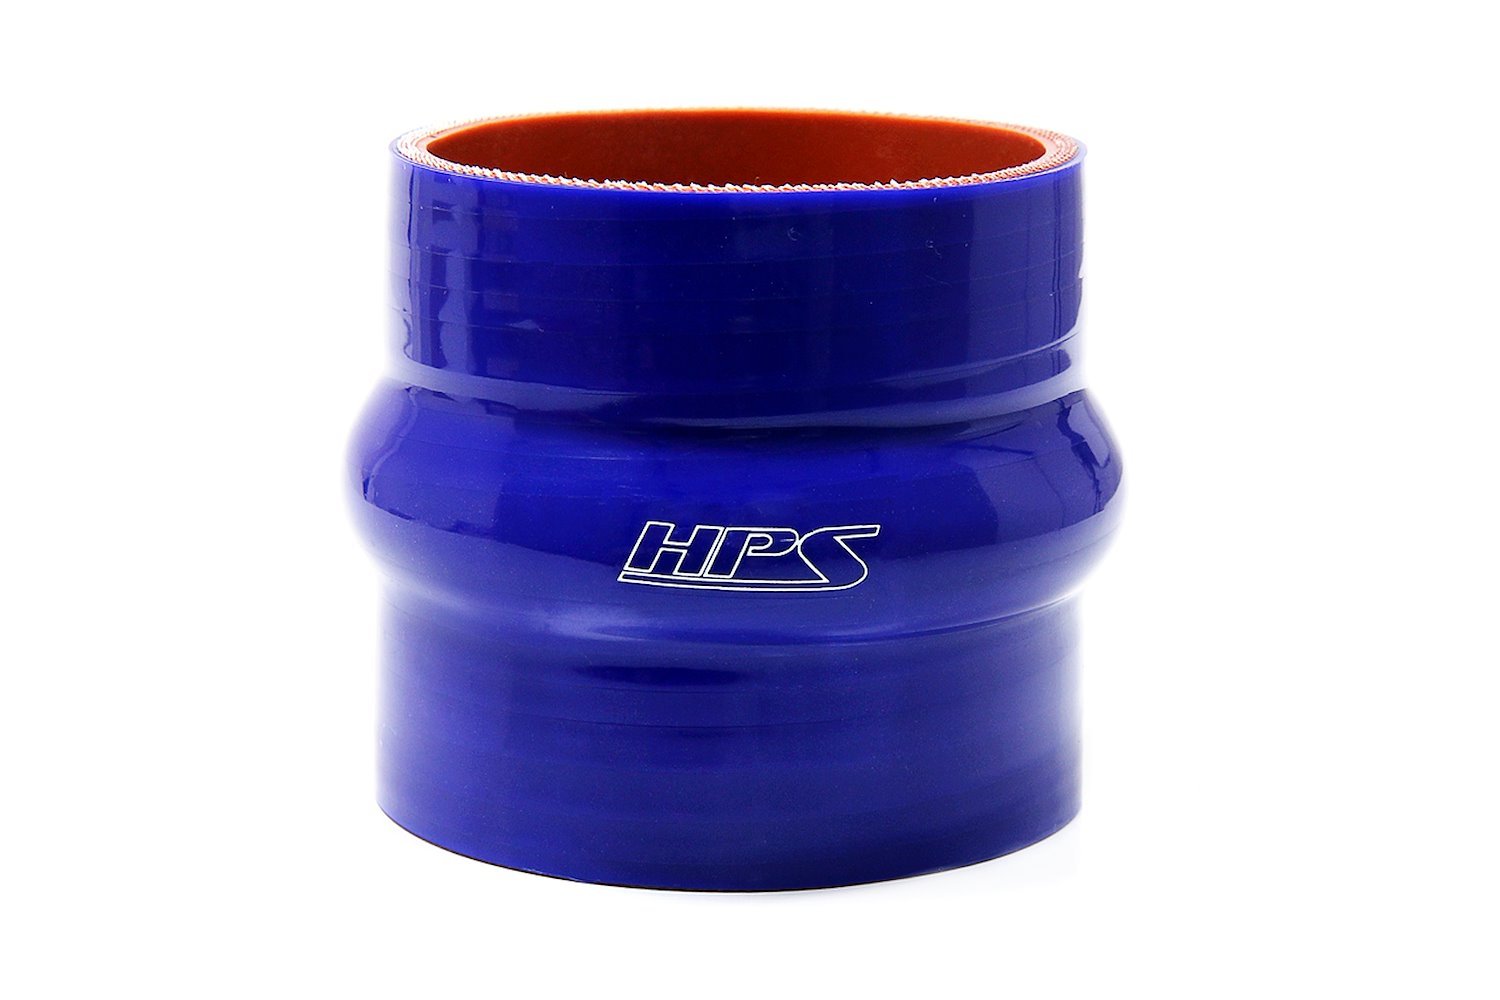 HTSHC-075-L6-BLUE Silicone Hump Coupler Hose, High-Temp 4-Ply Reinforced, 3/4 in. ID, 6 in. Long, Blue